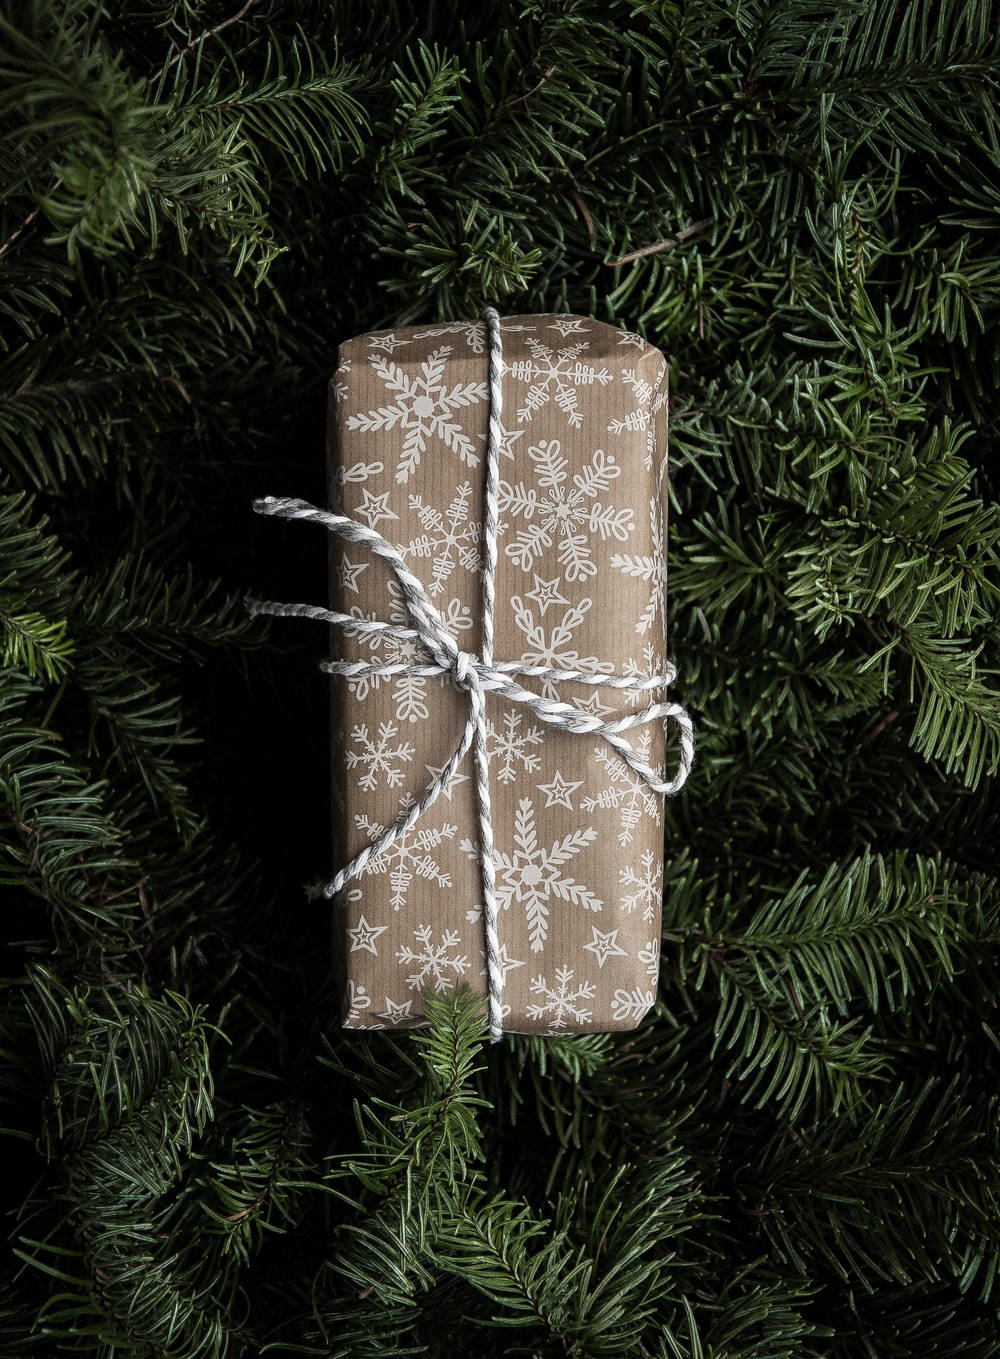 Festive Christmas Gift Wrapped In Brown And White Background